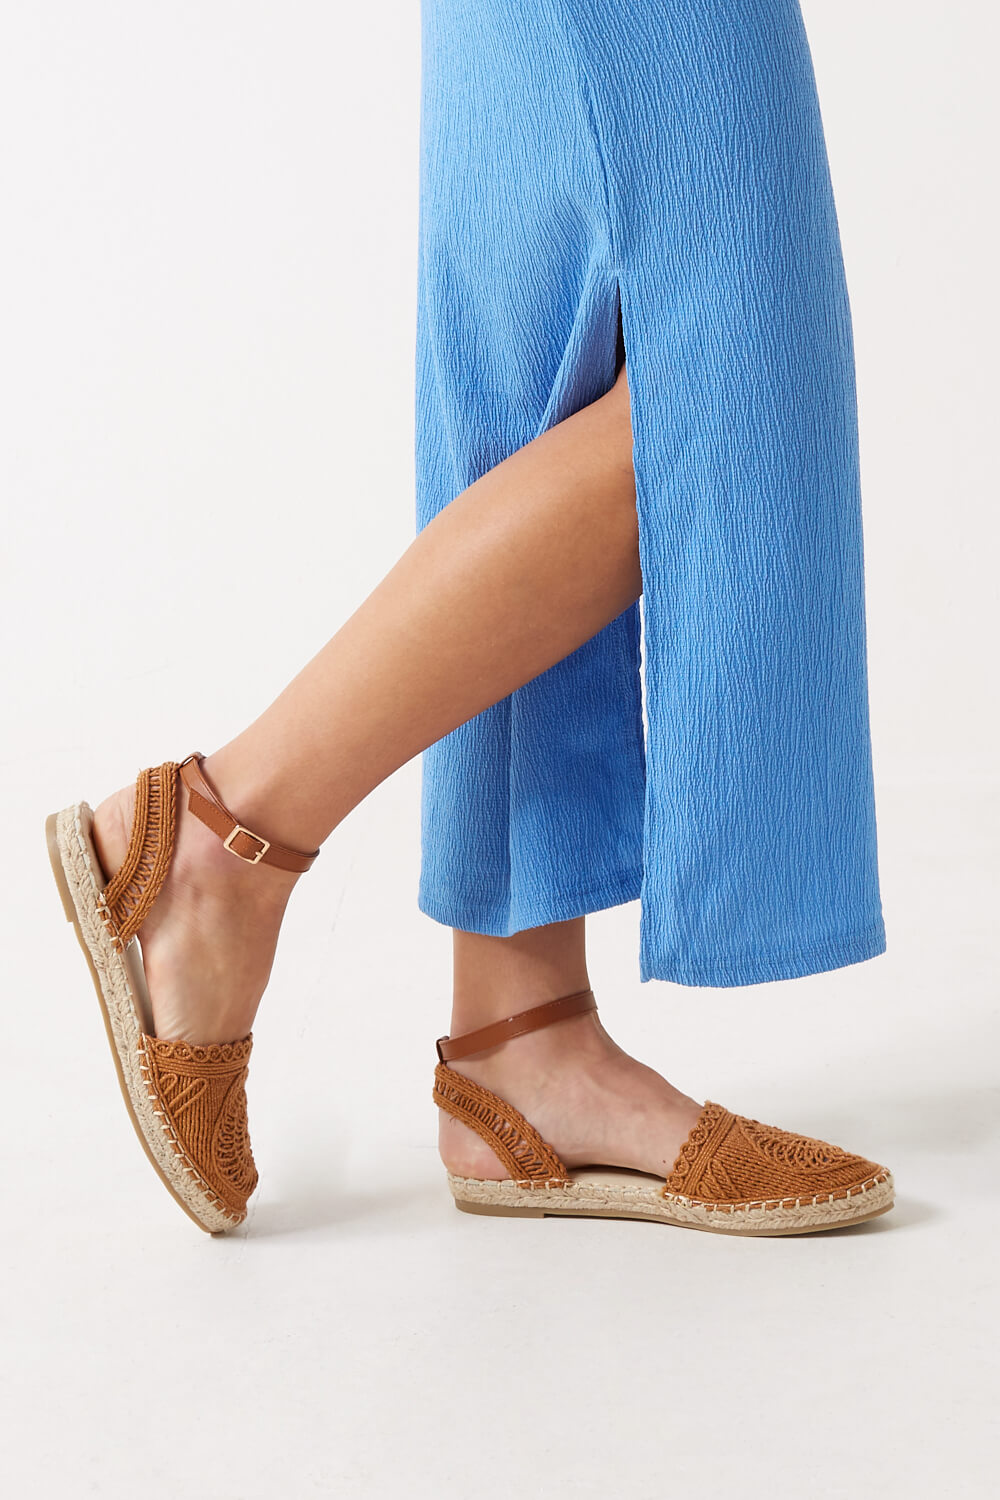 Efashion Paris Holly Crochet Espadrille Sandals in Camel | iCLOTHING ...